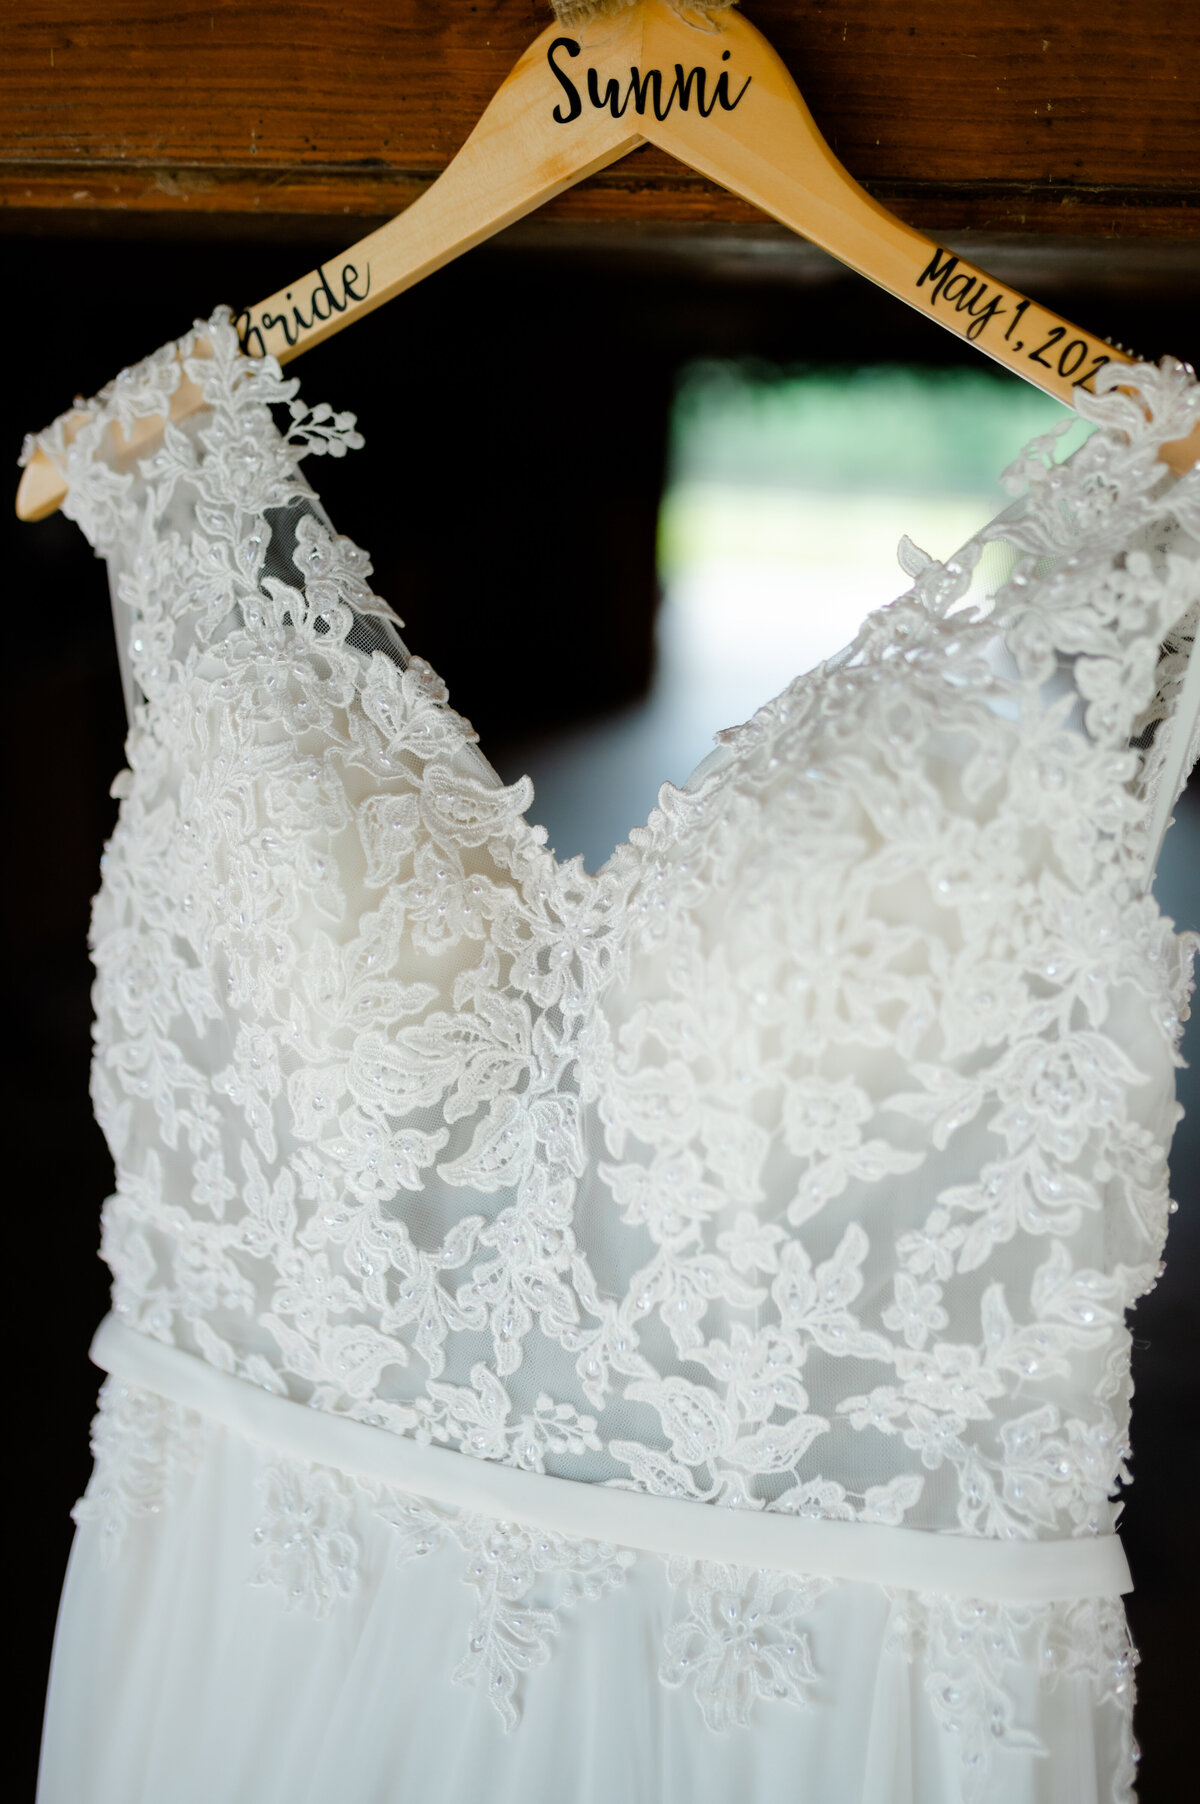 lace wedding dress hanging on a wood hanger in a doorway with the brides name and wedding day date